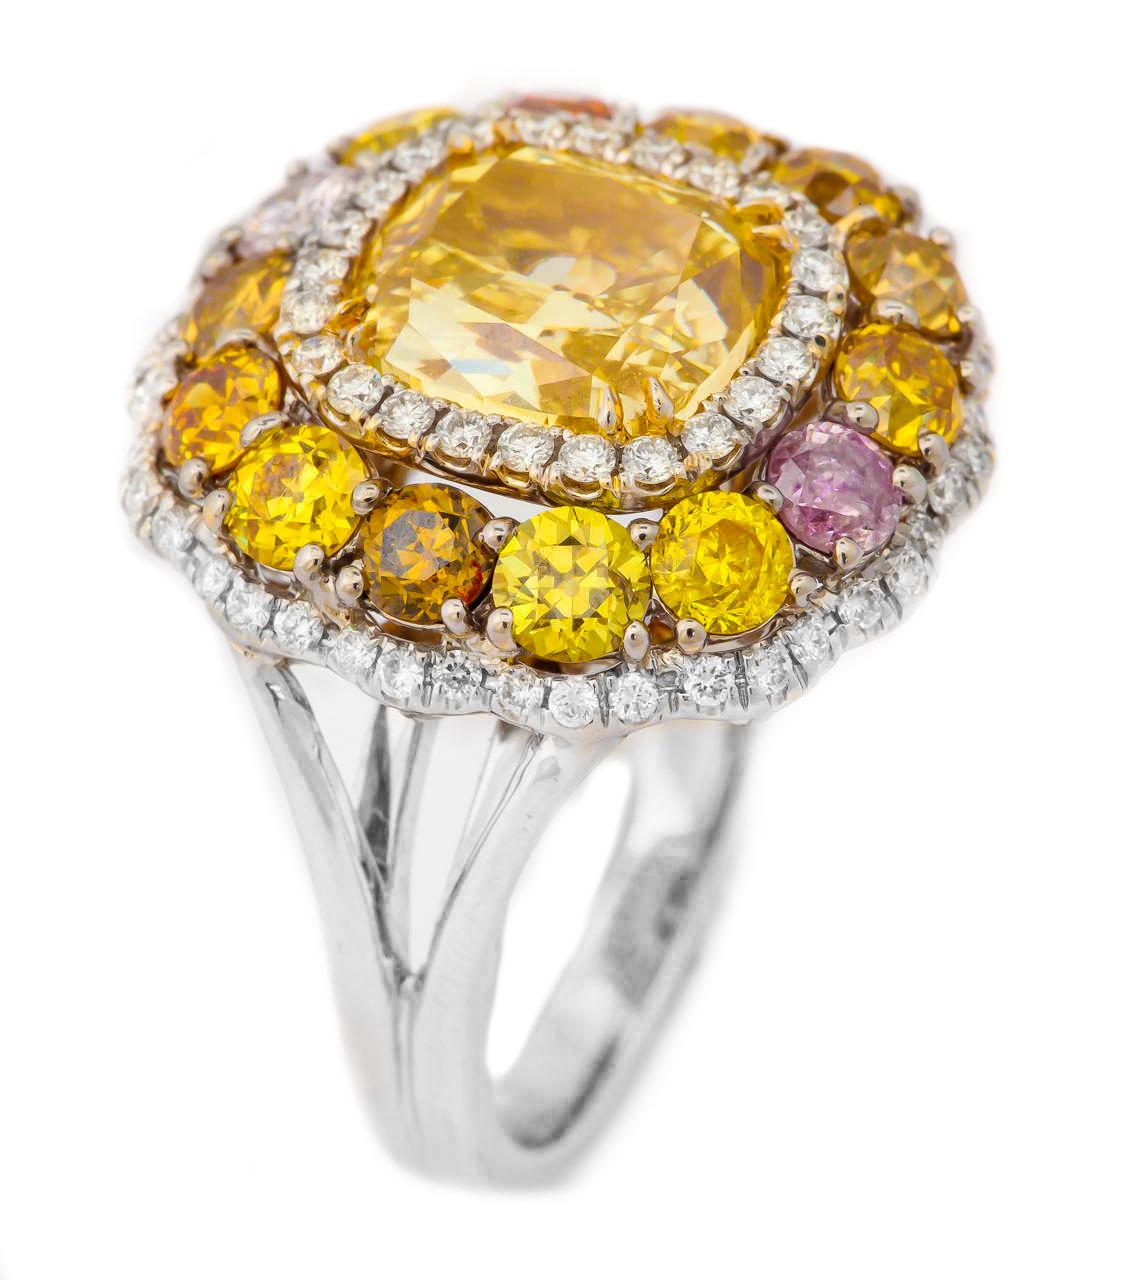 18kt white gold cushion cut diamond ring with center GIA certified 3.02 fancy yellow brownish -vs1 in clarity cushion cut diamond (radc889) set with 4.12 ct of fancy color diamonds all around.
